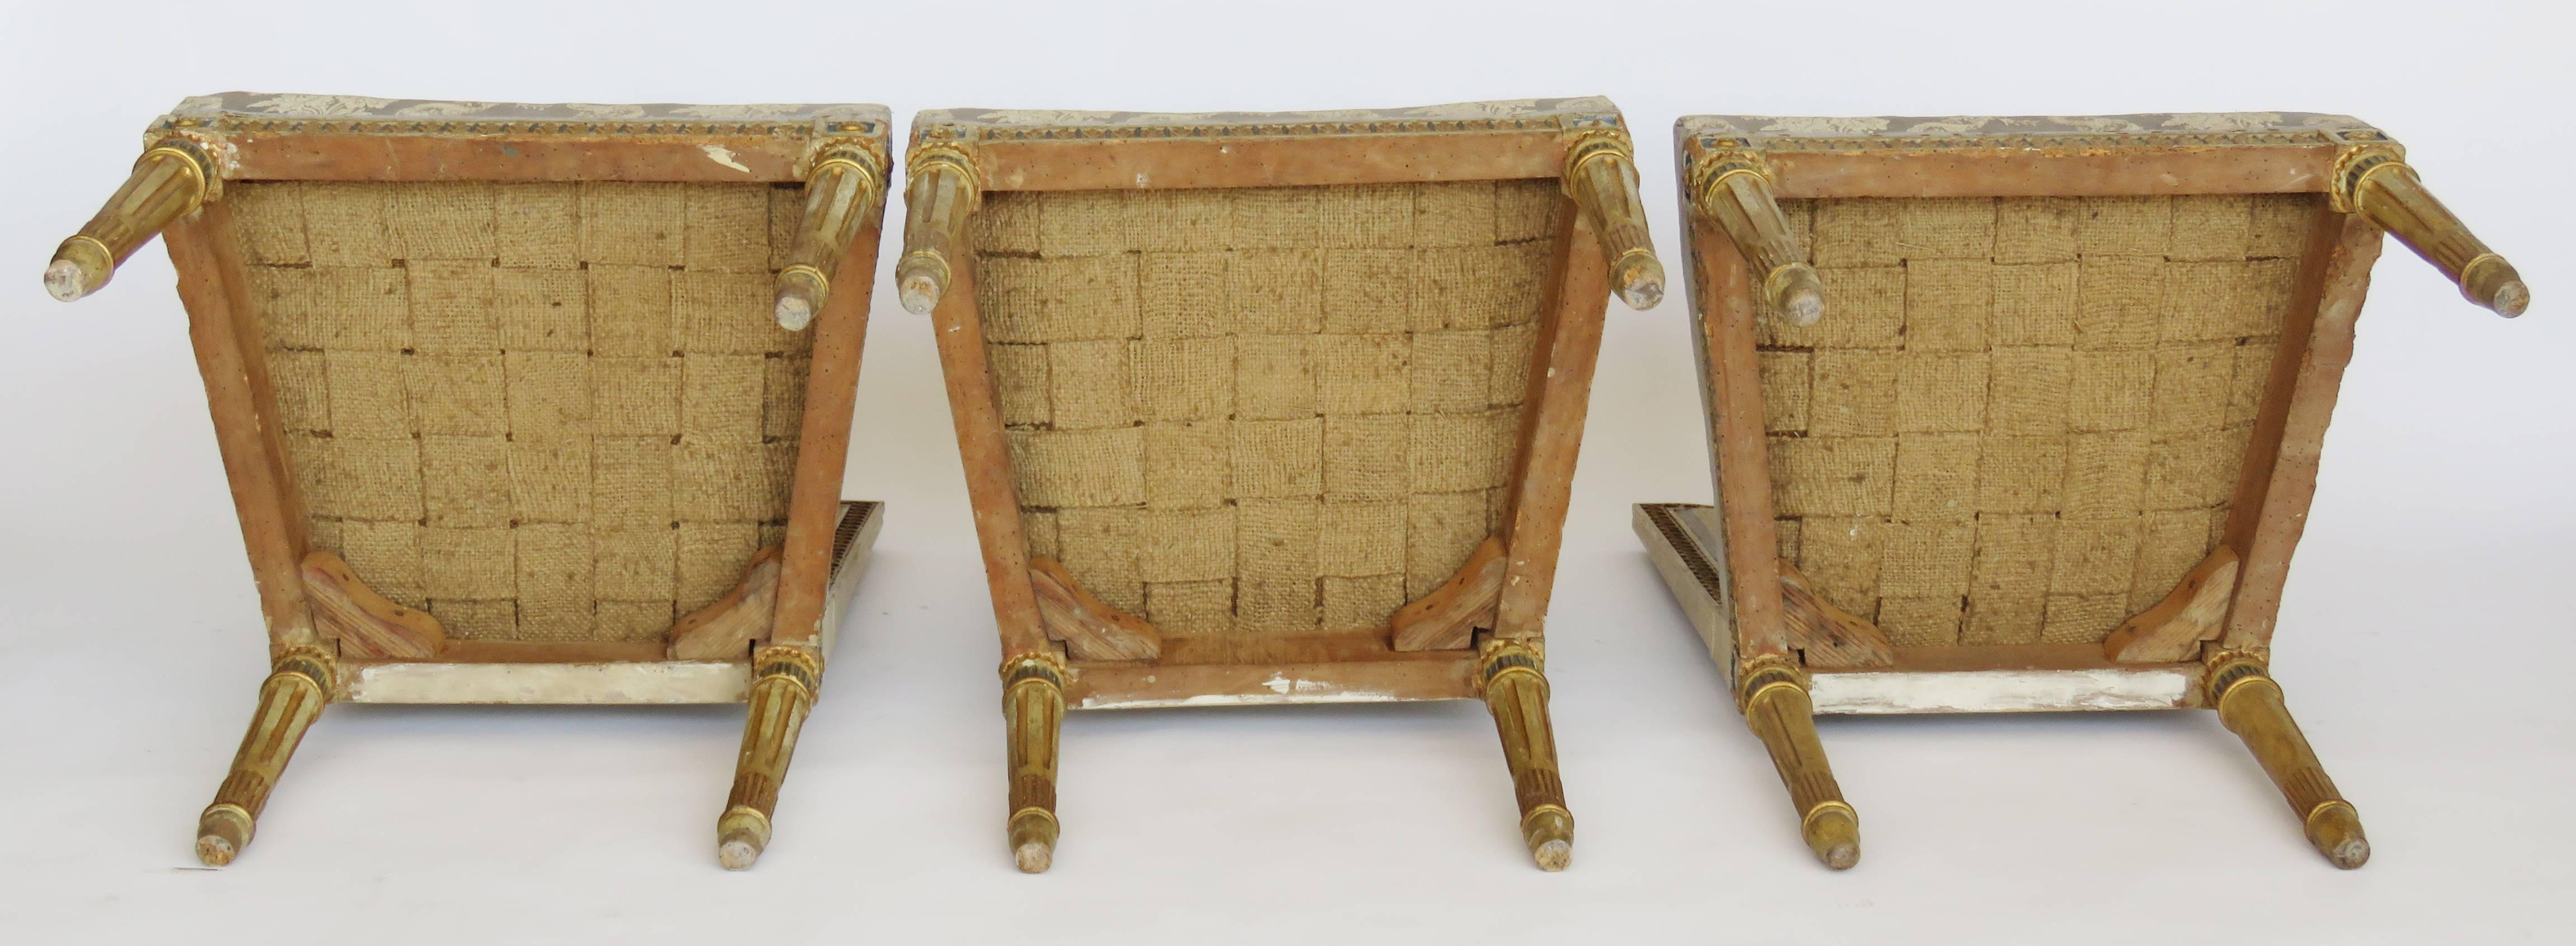 Set of Three Giltwood Louis XVI Style Chairs For Sale 1